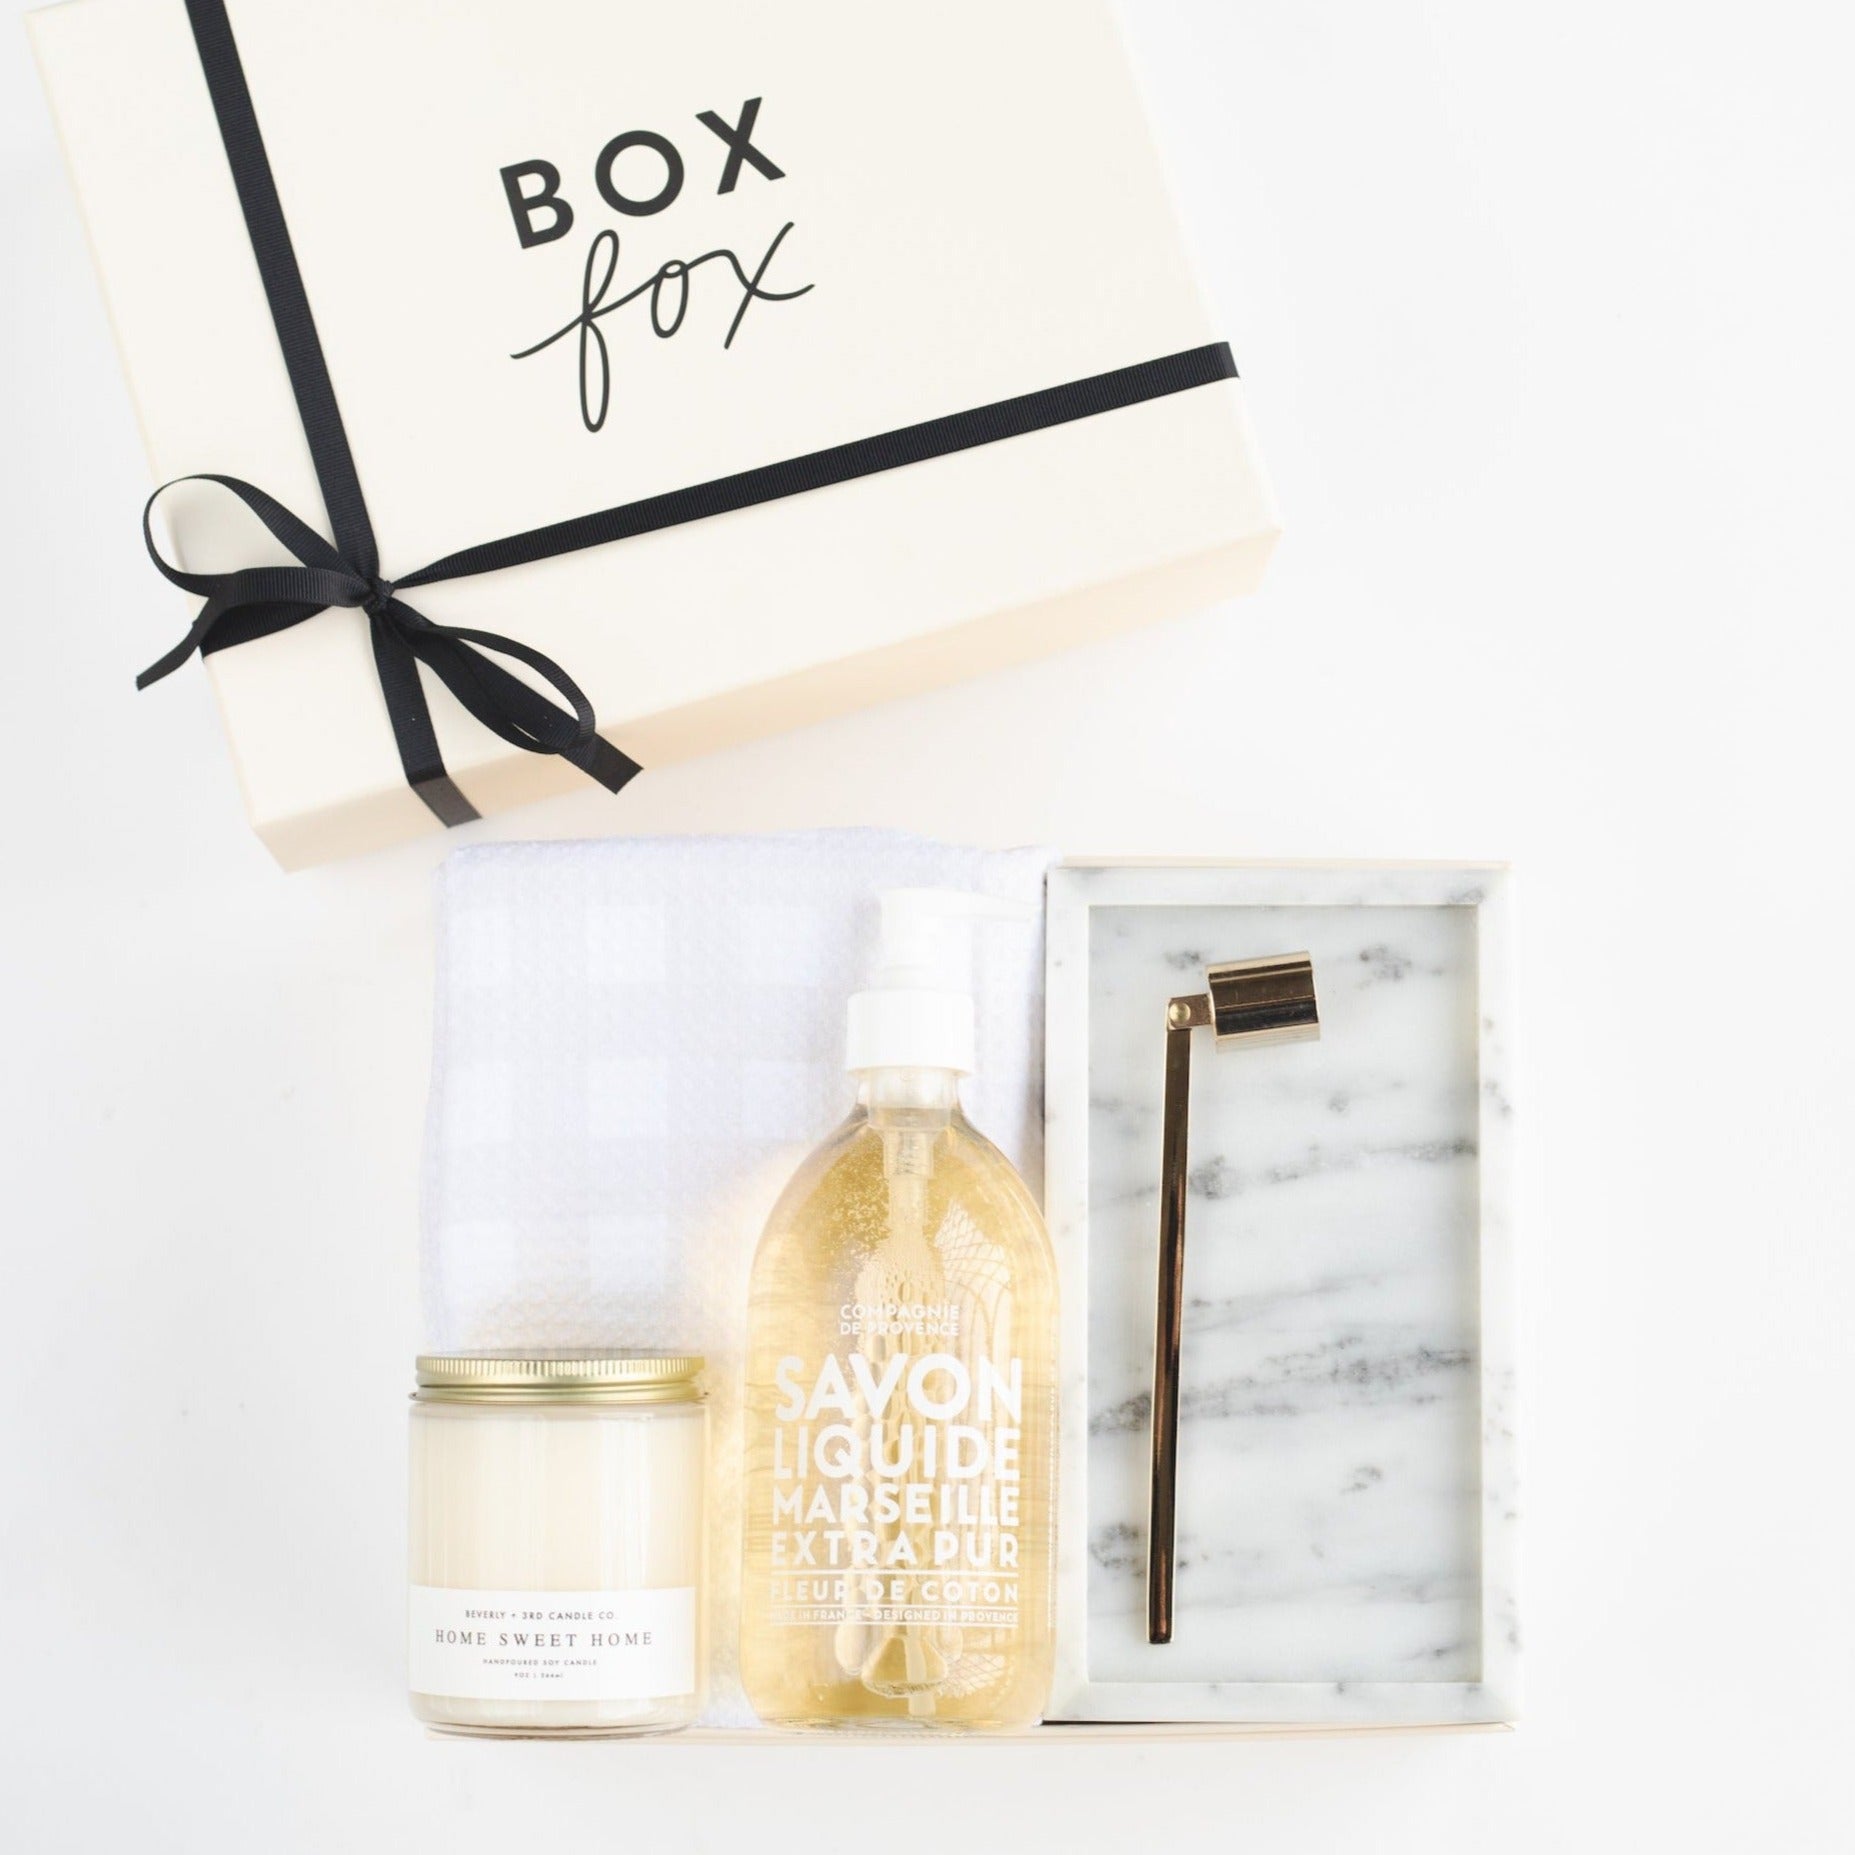 BOXFOX Original creme Housewarming Gift Box packed with Geometry Linen Plaid Tea Towel, Mielle Marble Tray, Vivie Gold Candle Snuffer, Beverly + 3rd Home Sweet Home Candle, and Compagnie de Provence 16.7 oz Liquid Hand Soap.